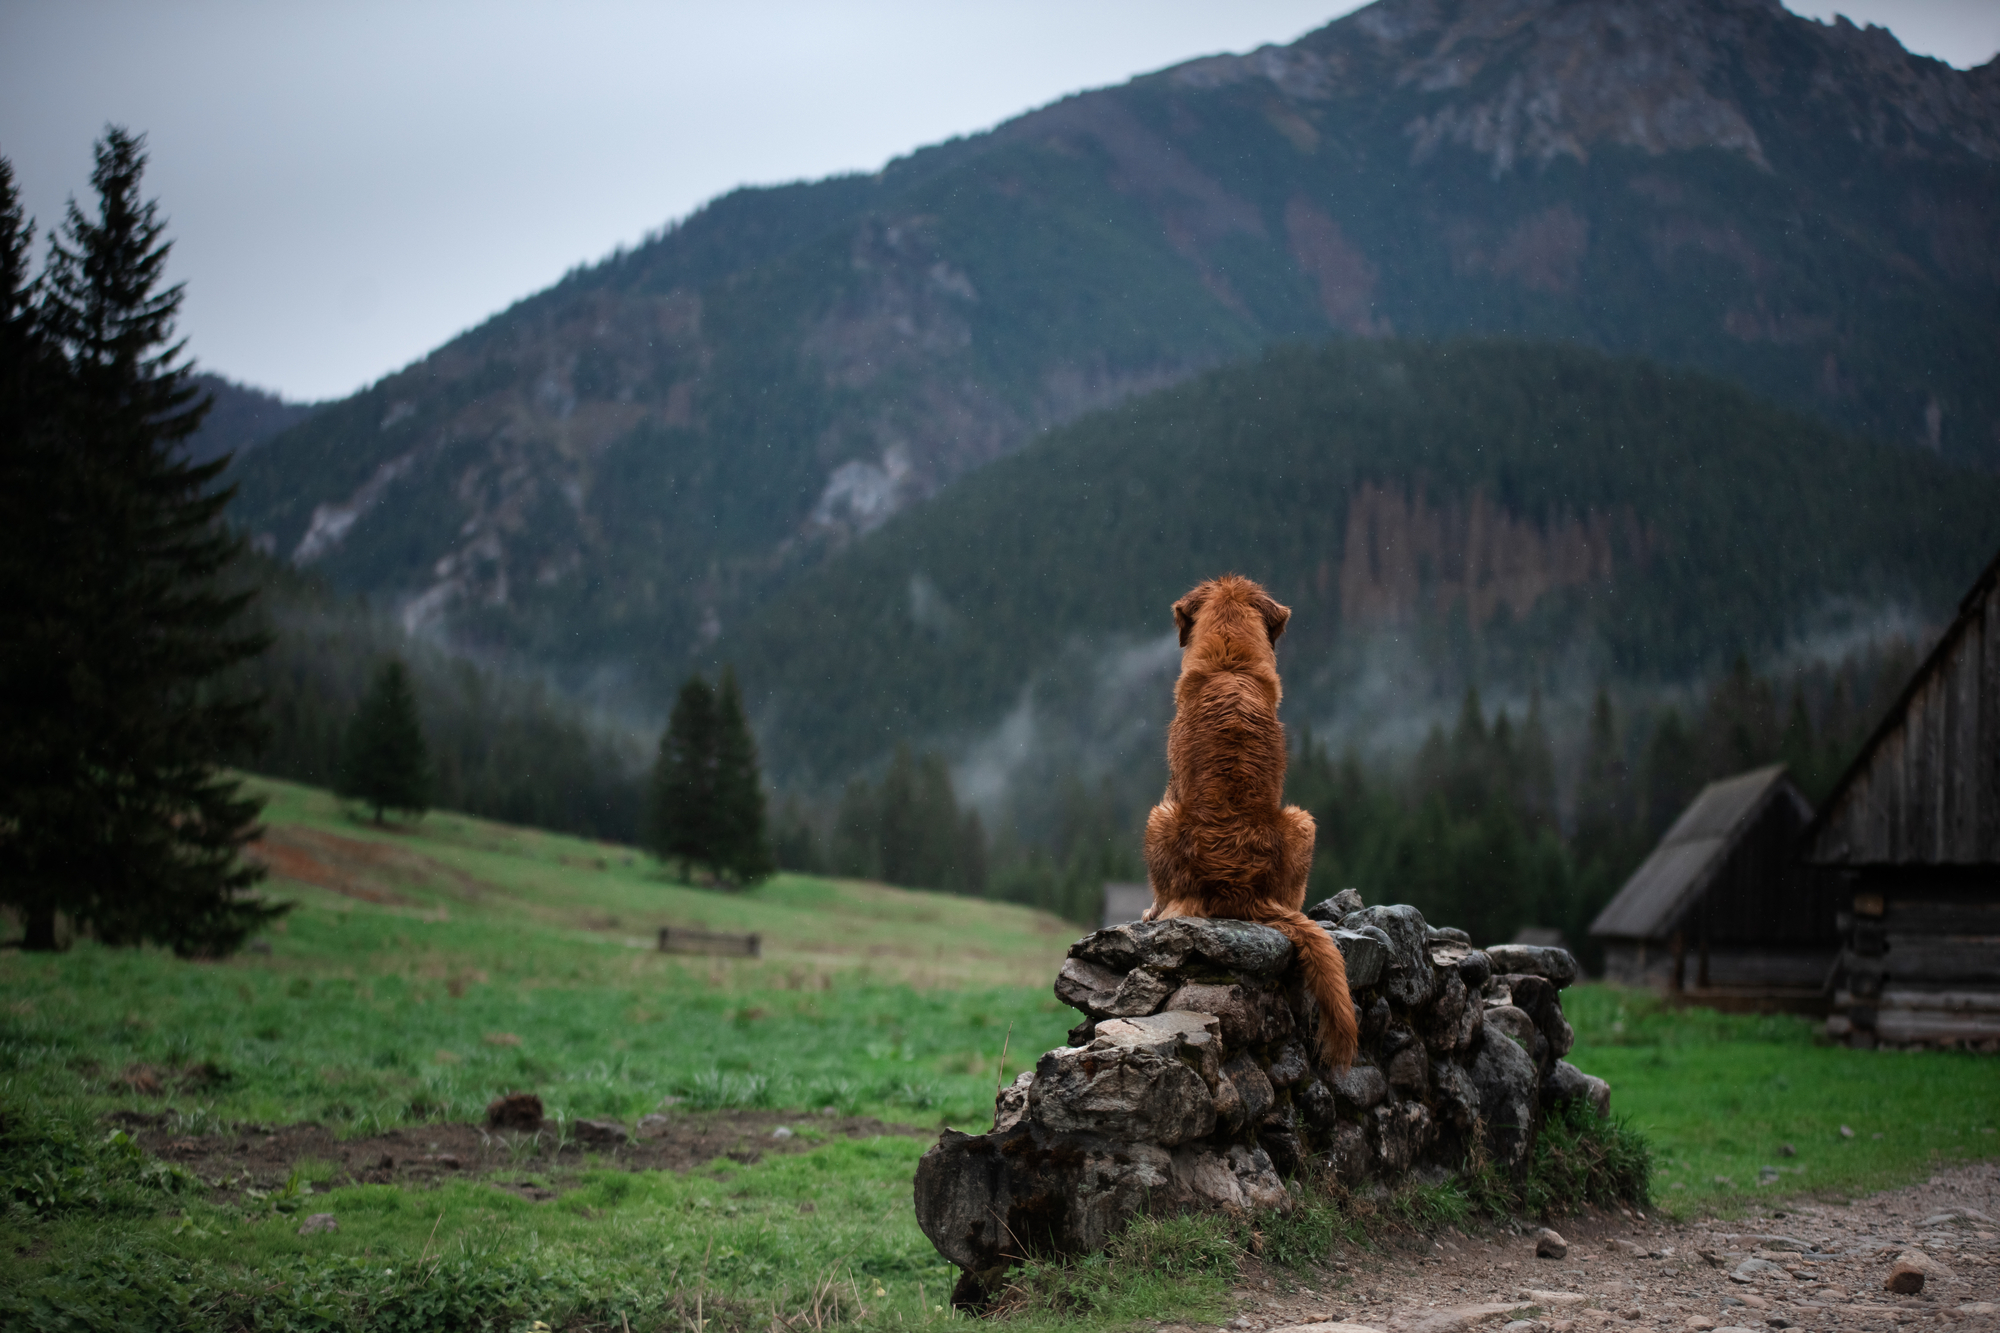 Nova Scotia Duck Tolling Retriever in the mountains, in the valley .